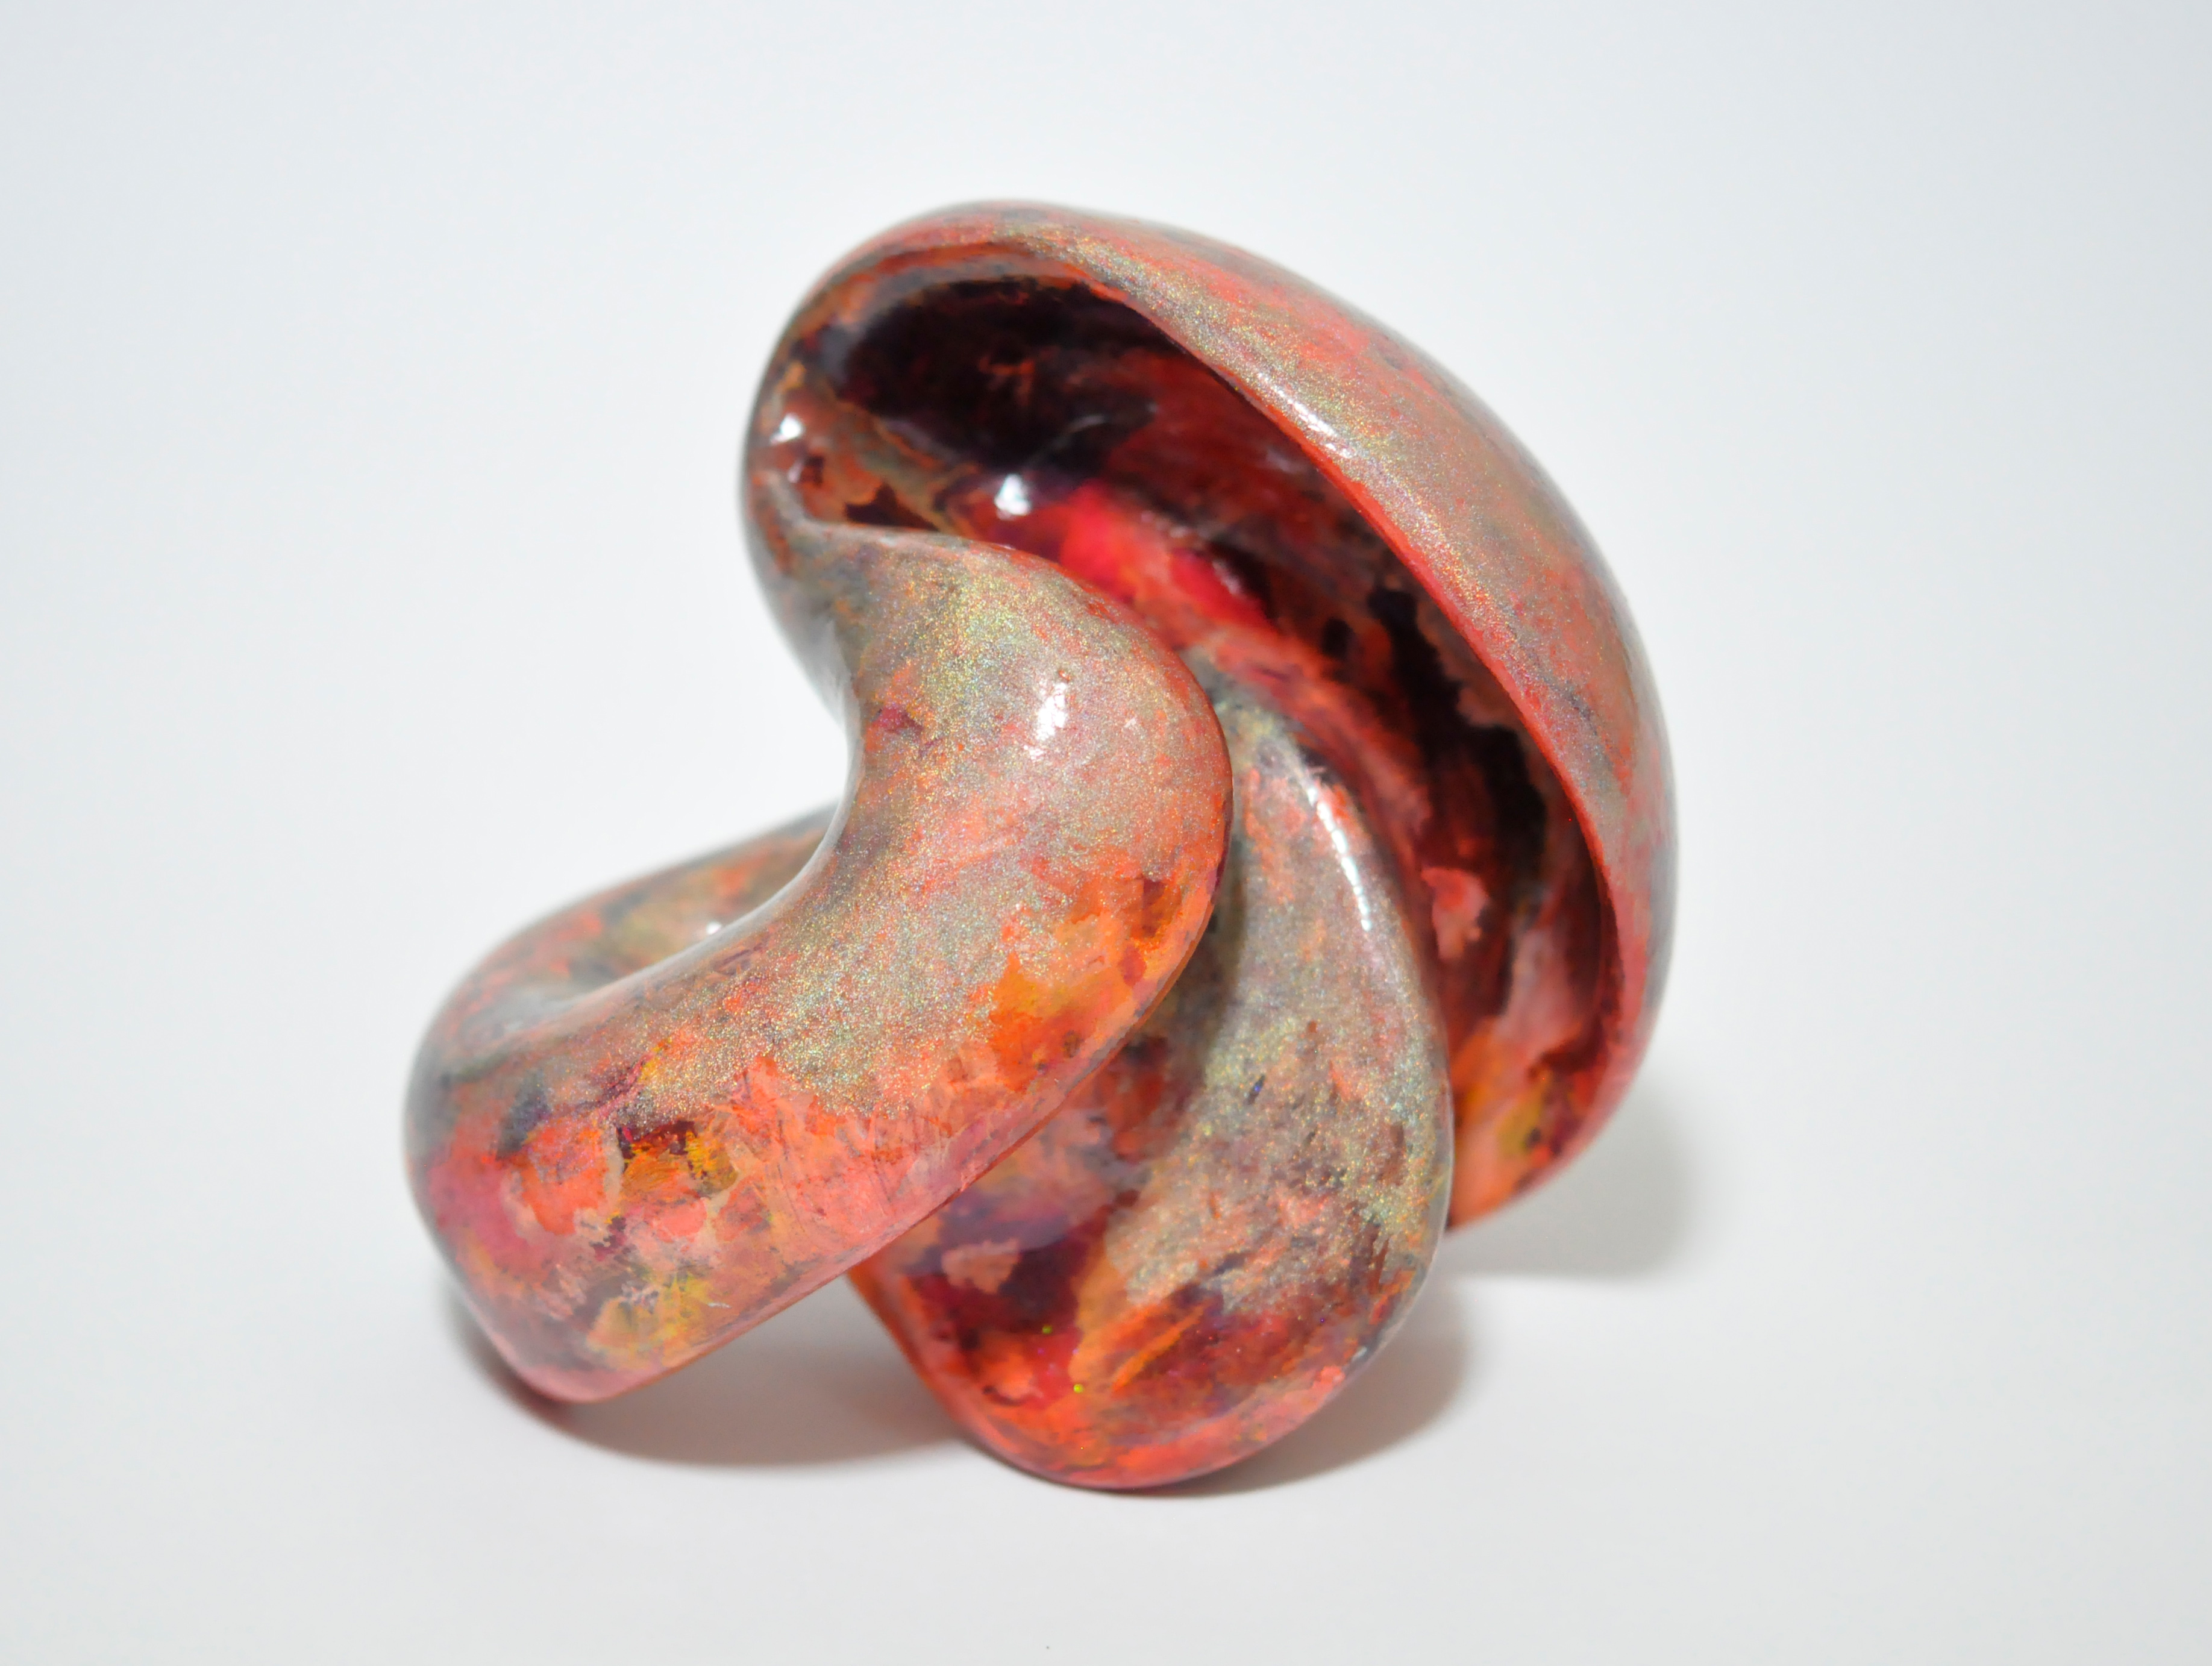 A Touch, 2012, Oil, Nail Polish, and Varnish on Clay, 3.9 x 4.7 x 3.1 in. / 10 x 12 x 8 cm [#SS12SC018]